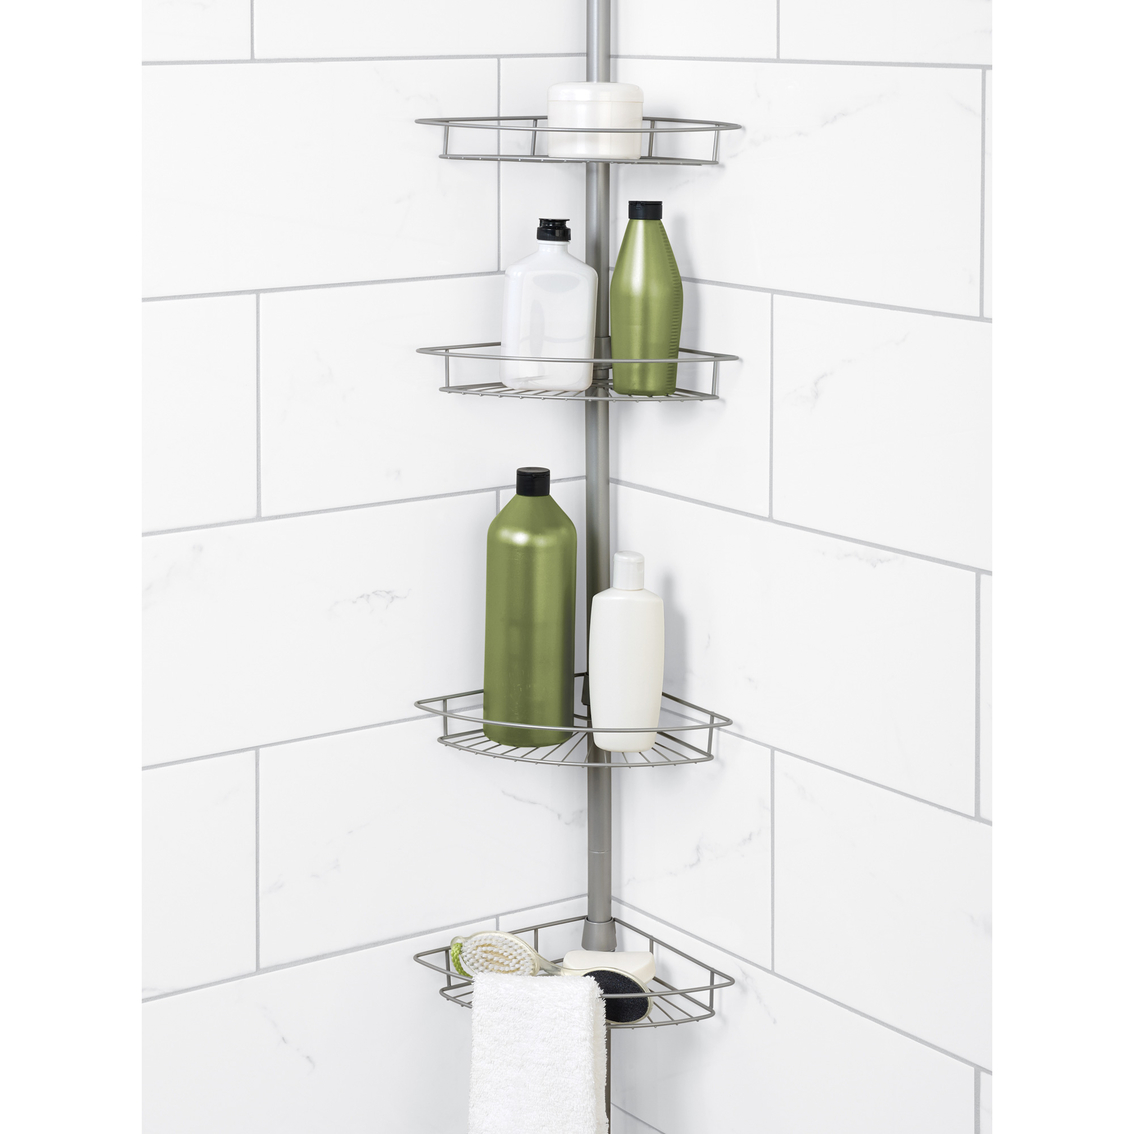 Zenna Home Rustproof Tension Pole Shower Caddy with 4 Baskets in